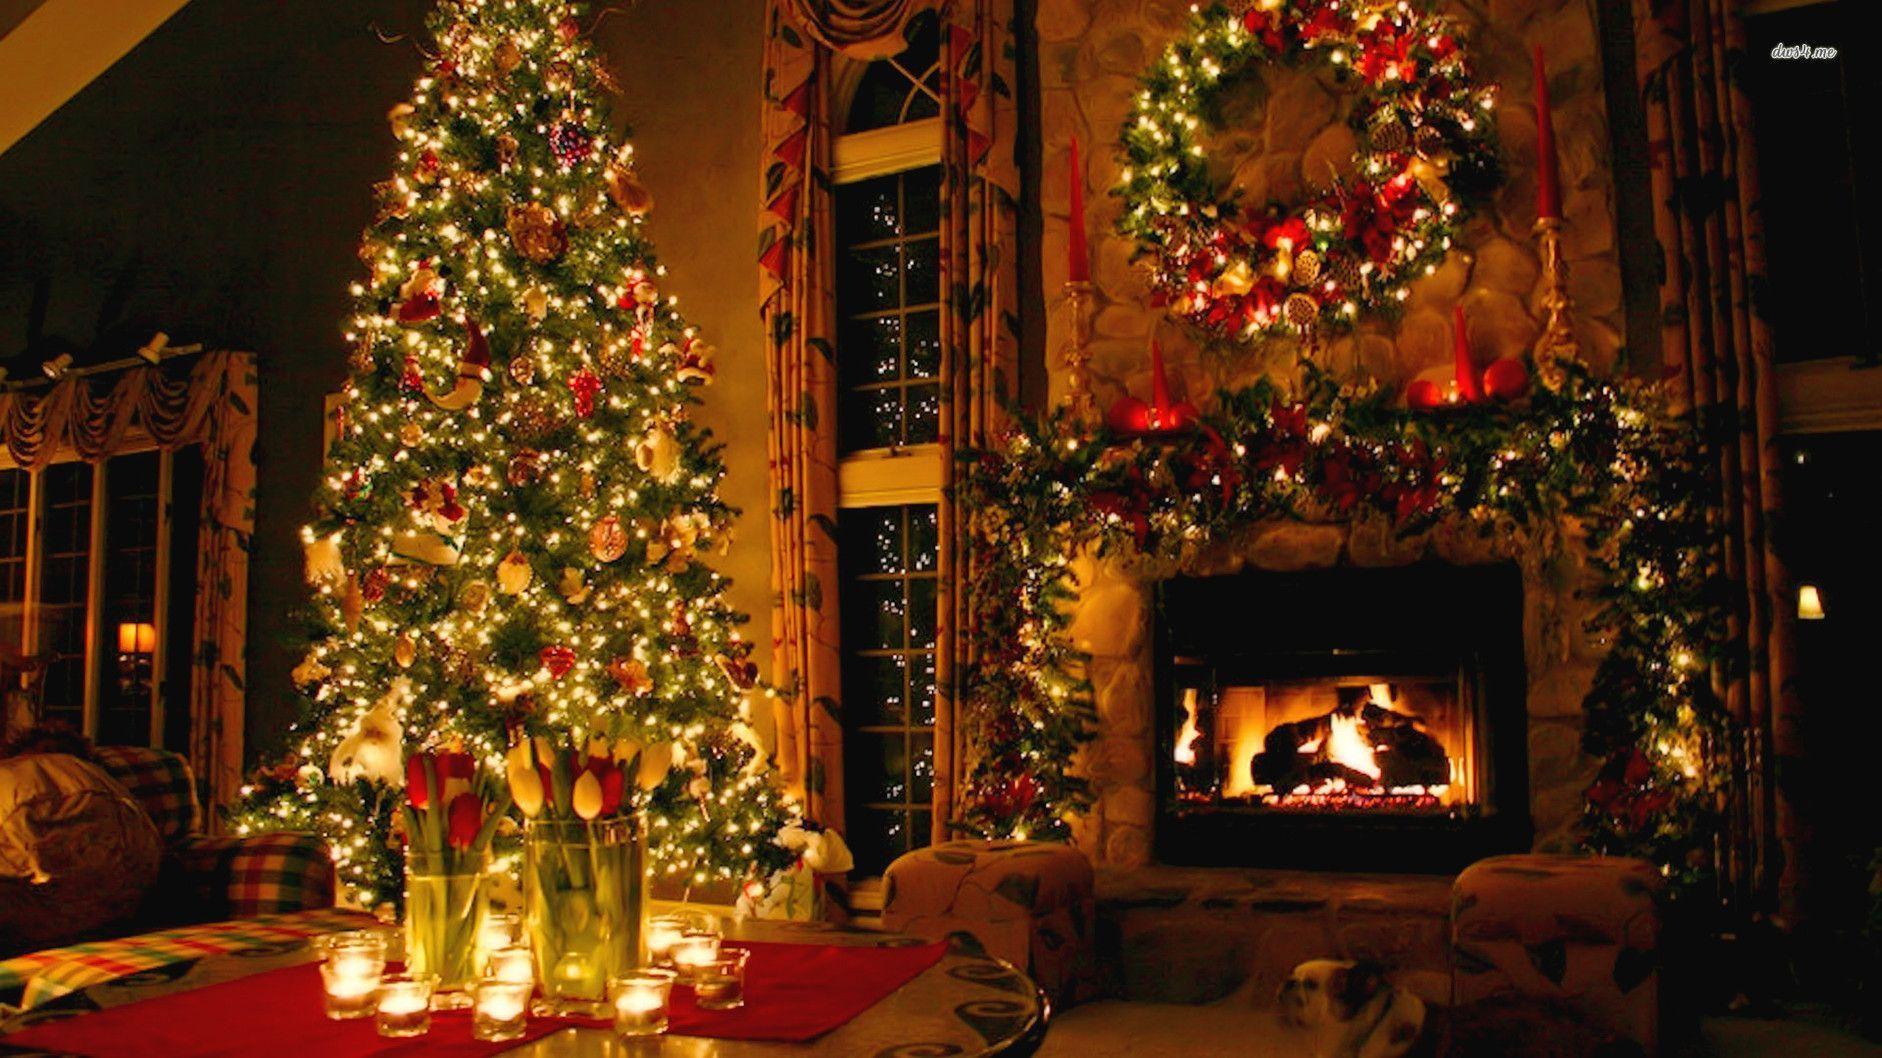 Fireplace Christmas Decor Wallpaper in HD